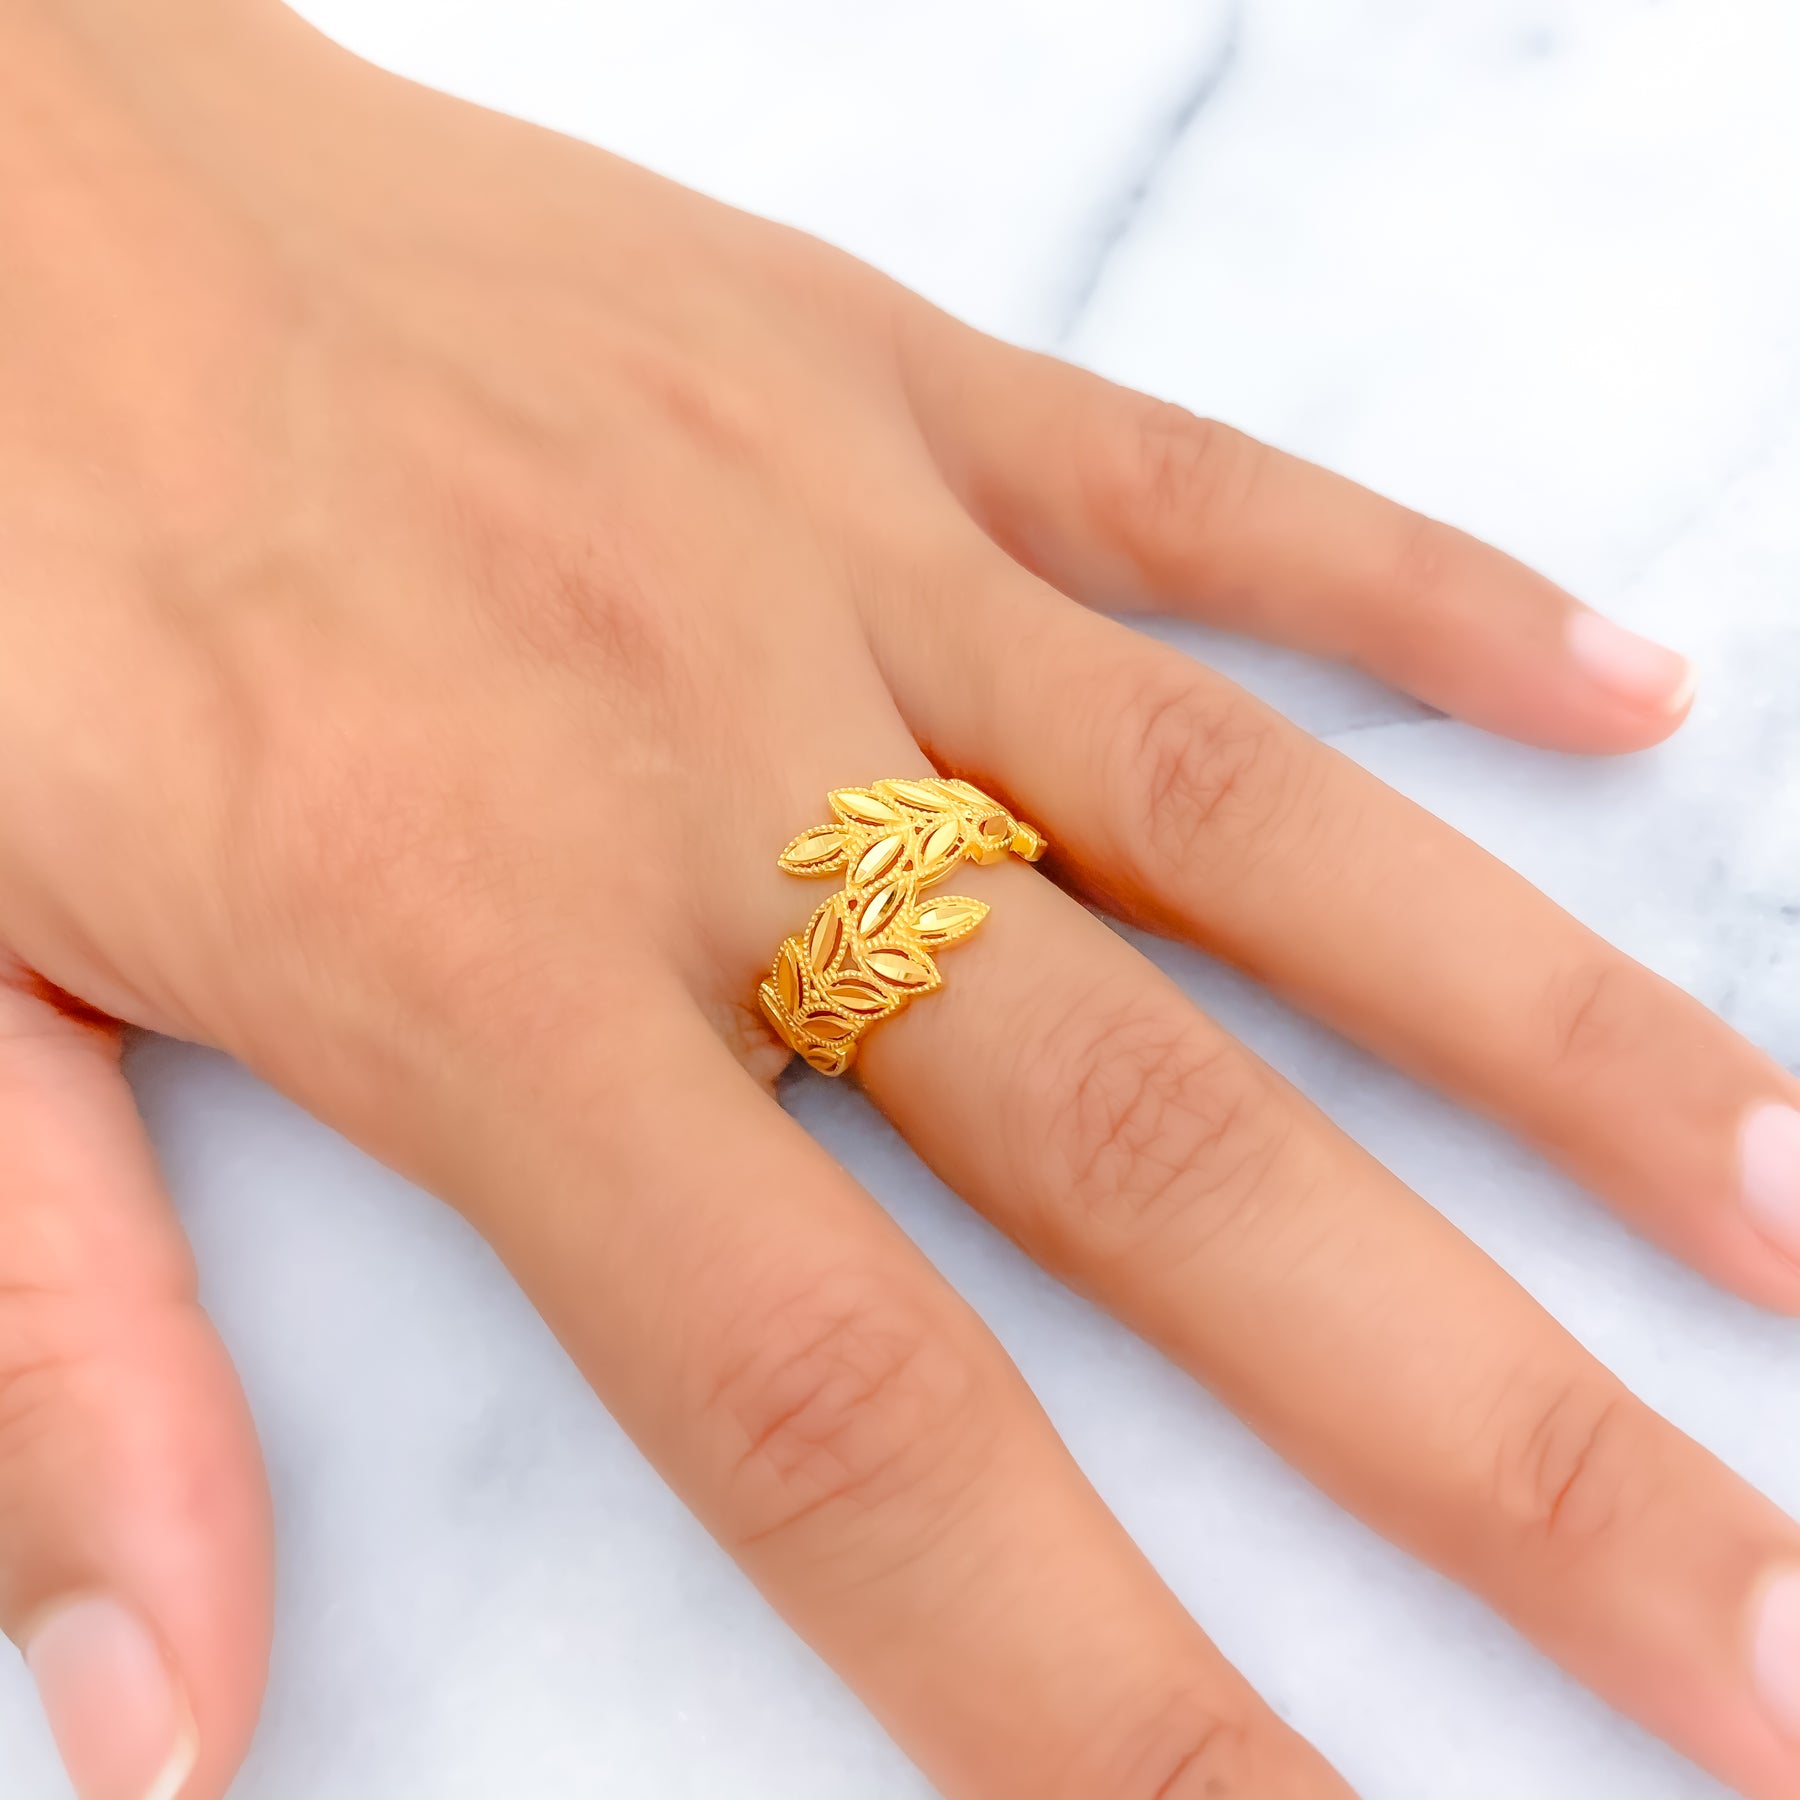 Buy quality 916 Gold Delicate Ring For Women in Ahmedabad